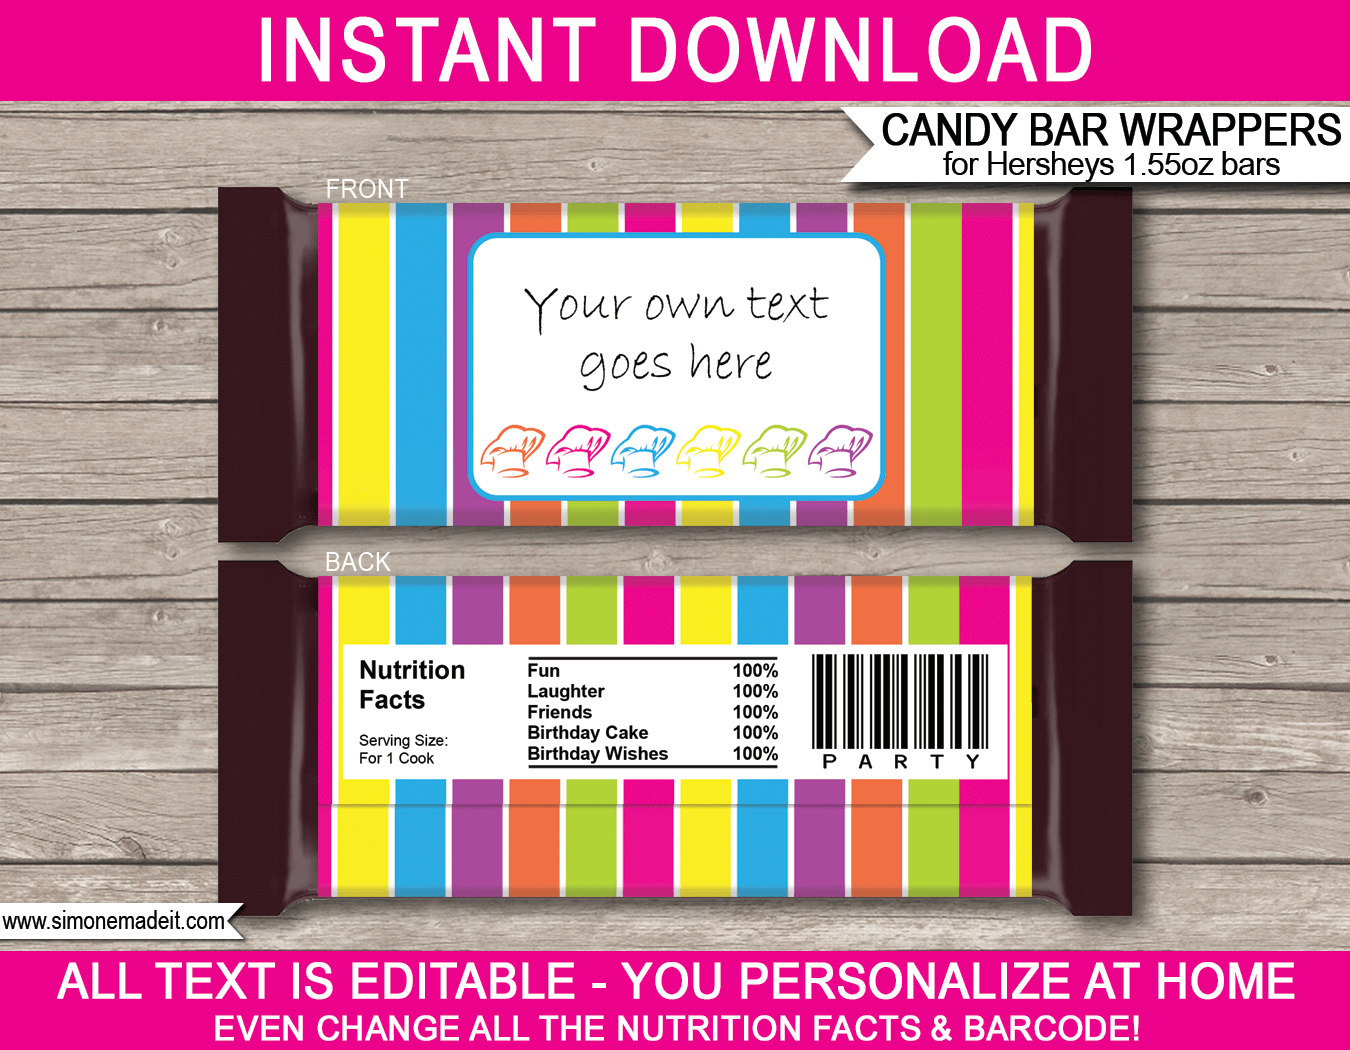 Candy Bar Wrapper Template For Mac - Ameasysite Within Candy Bar Wrapper Template For Word